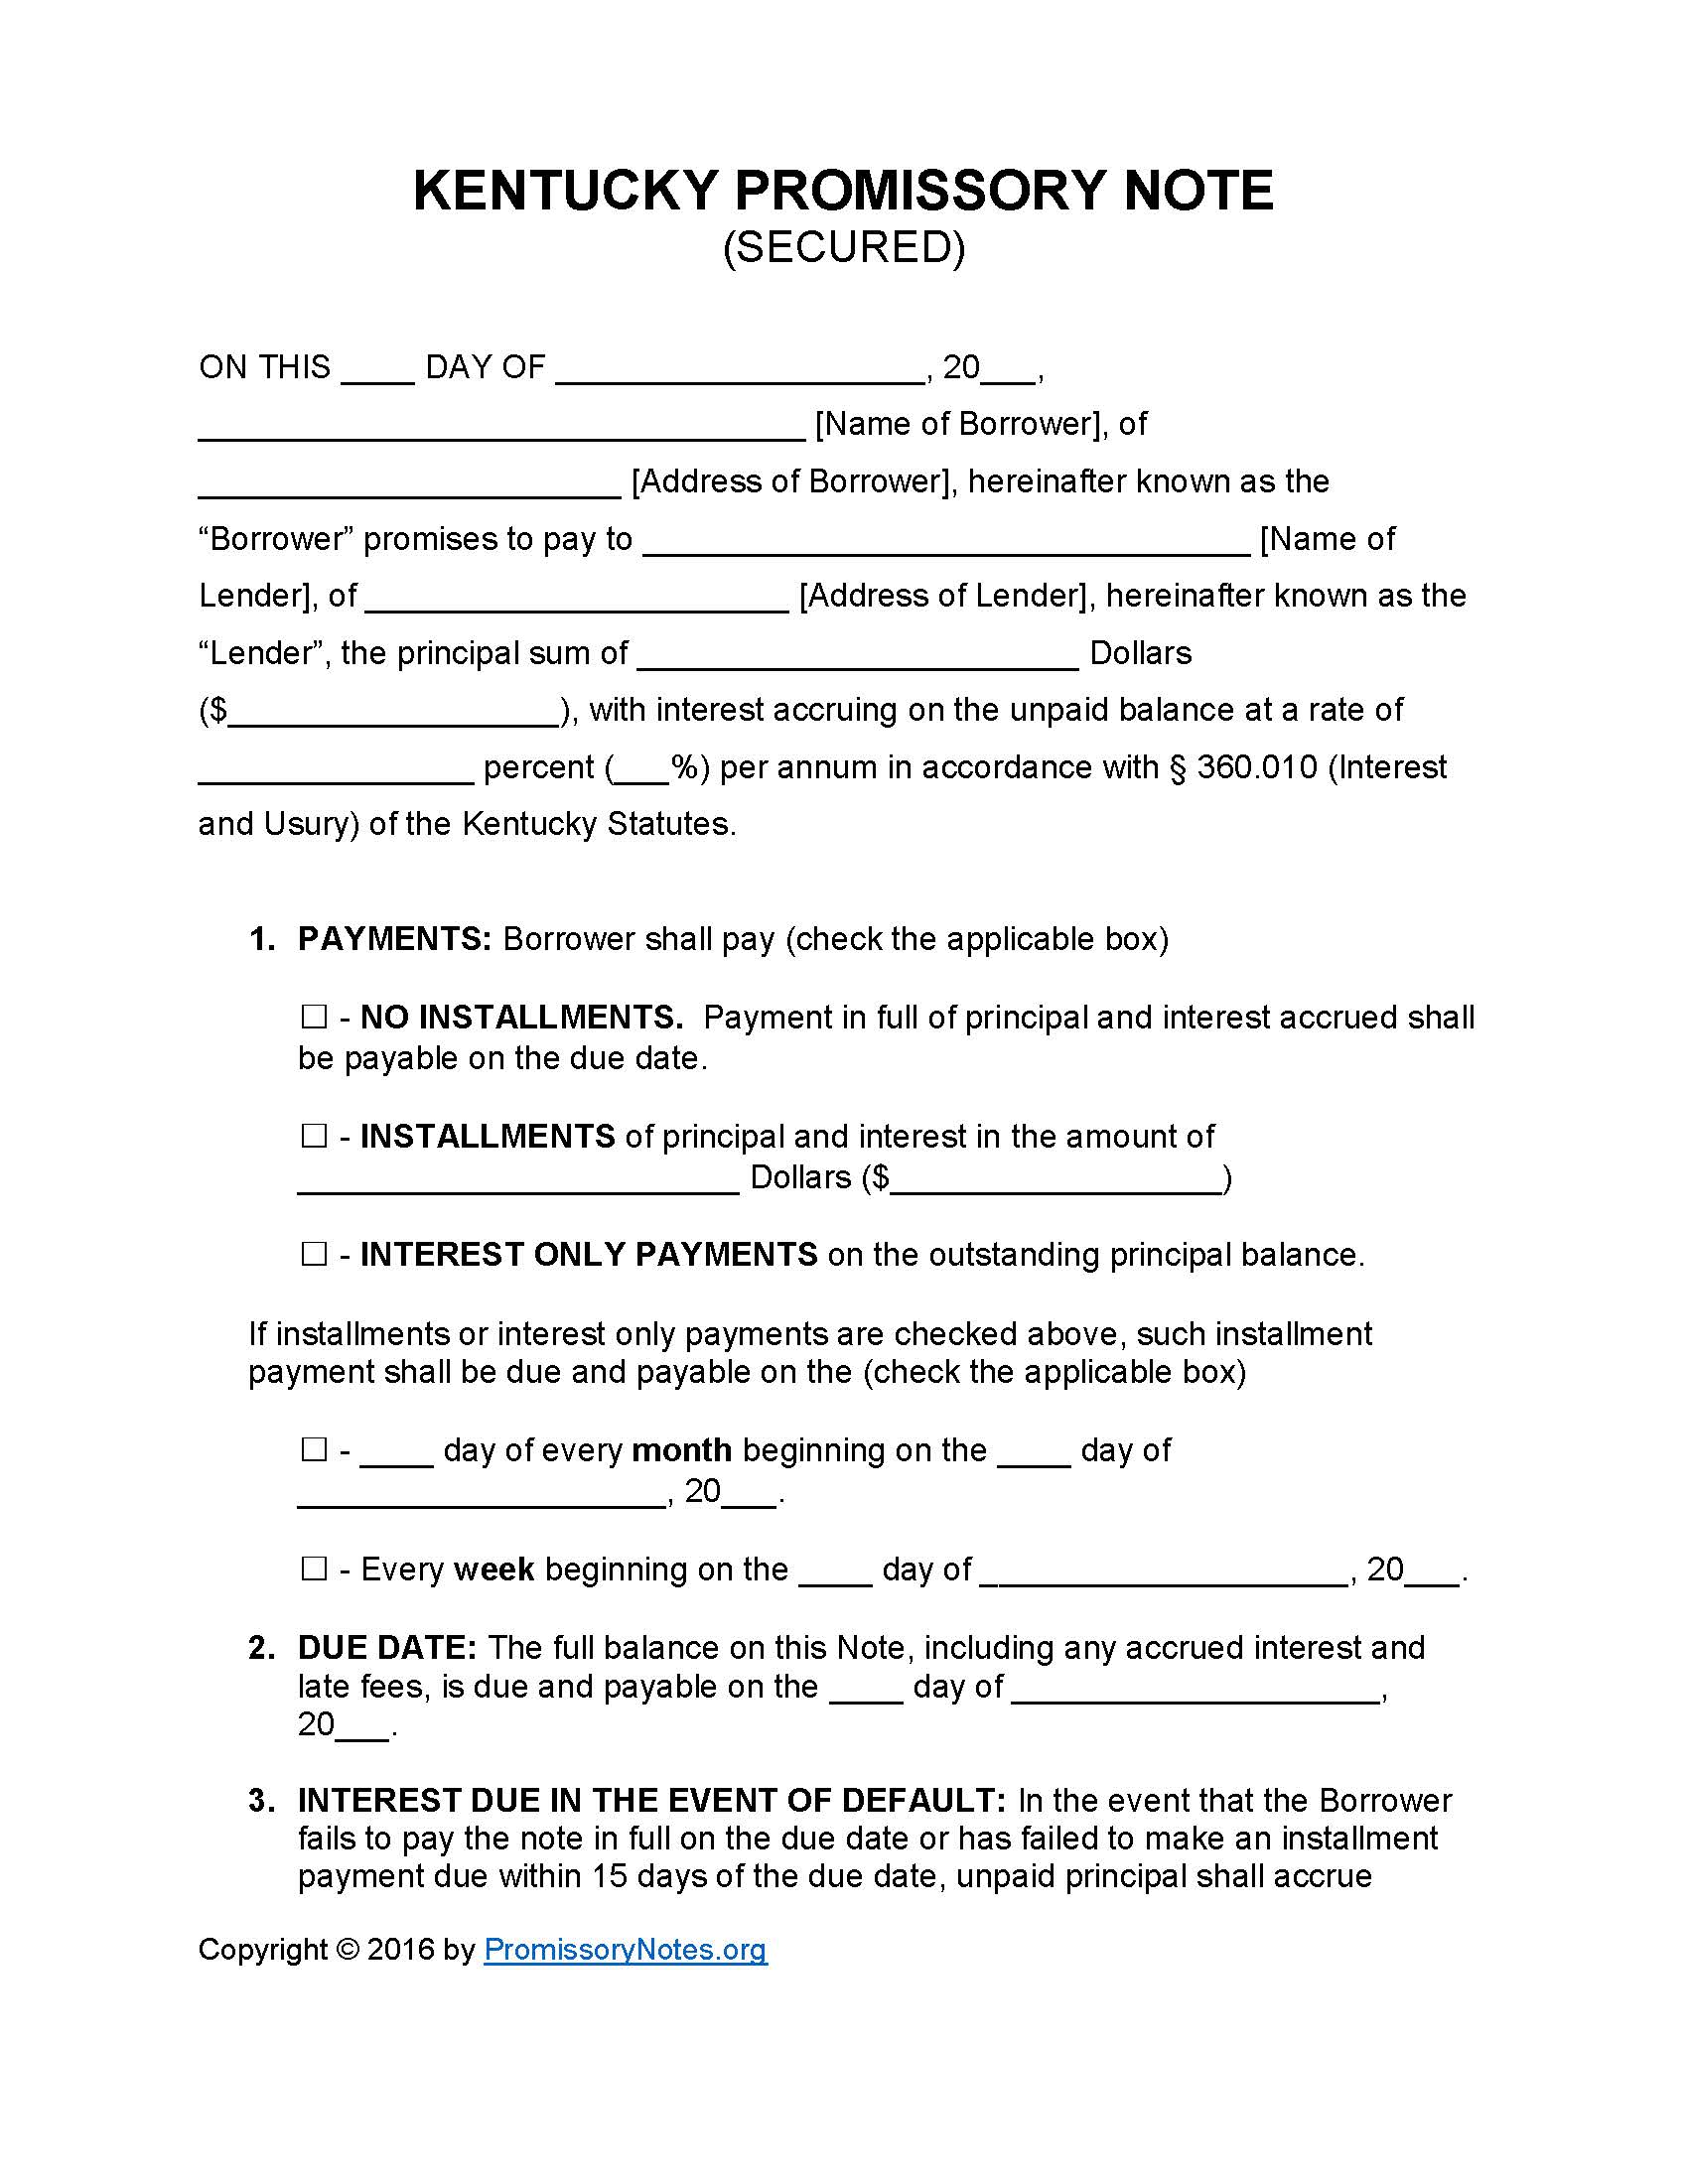 kentucky-secured-promissory-note-form